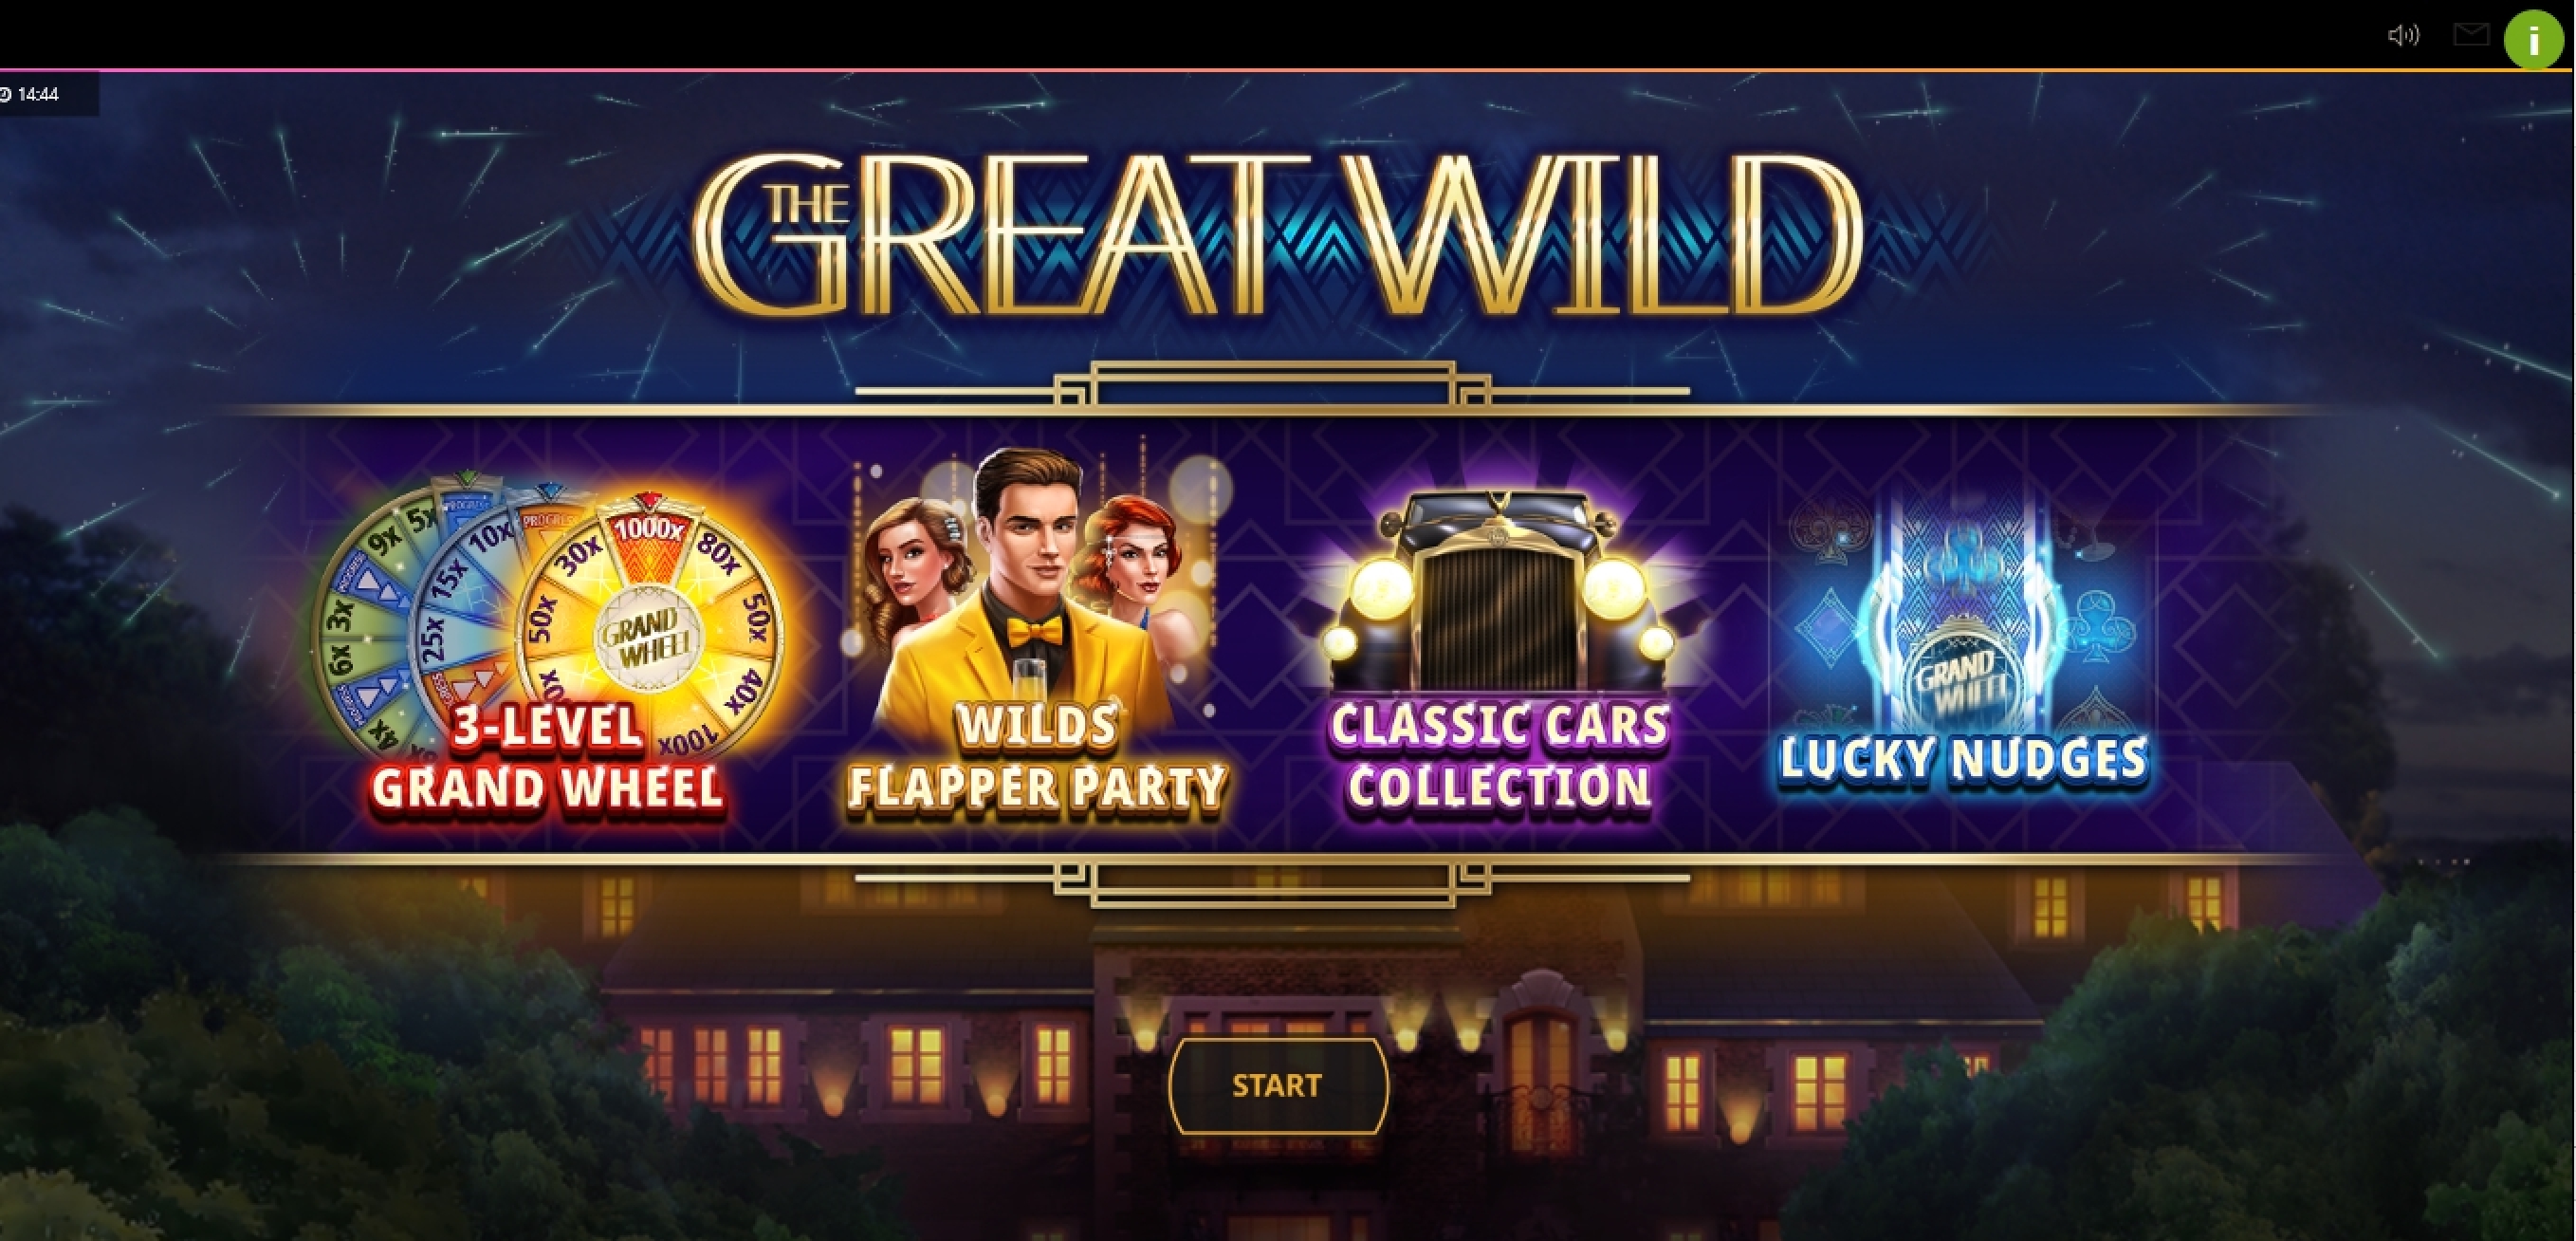 Play The Great Wild Free Casino Slot Game by Cayetano Gaming